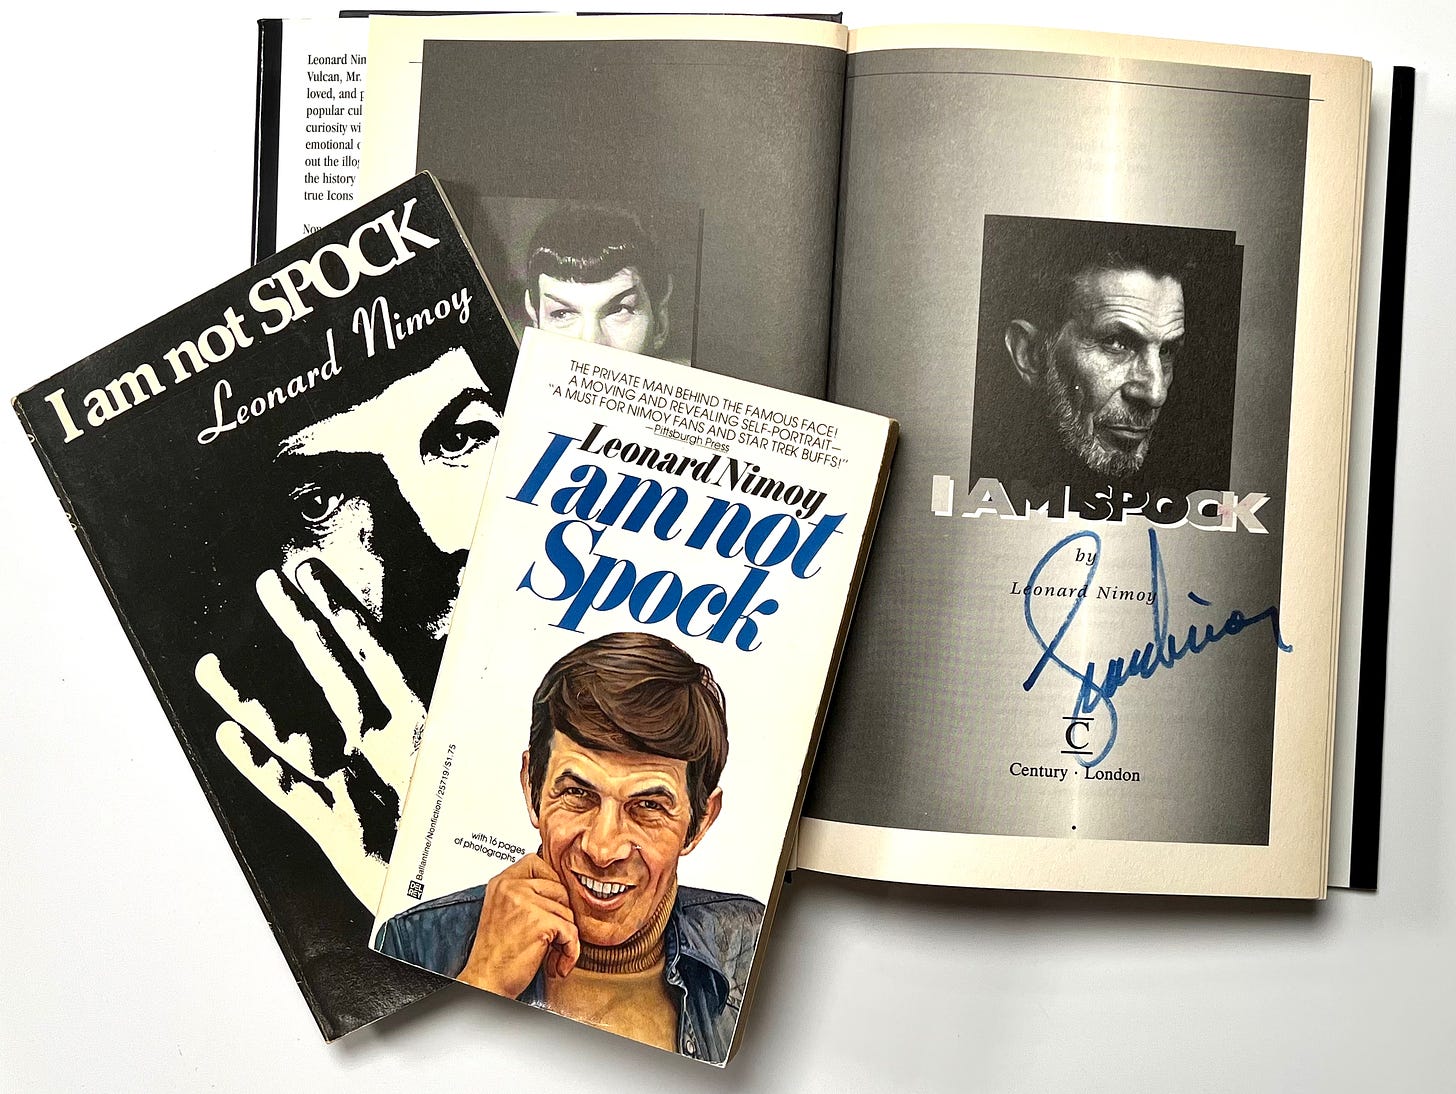 Three books: I am not Spock, a second copy of I am not Spock, and I AM SPOCK which is signed by Leonard Nimoy